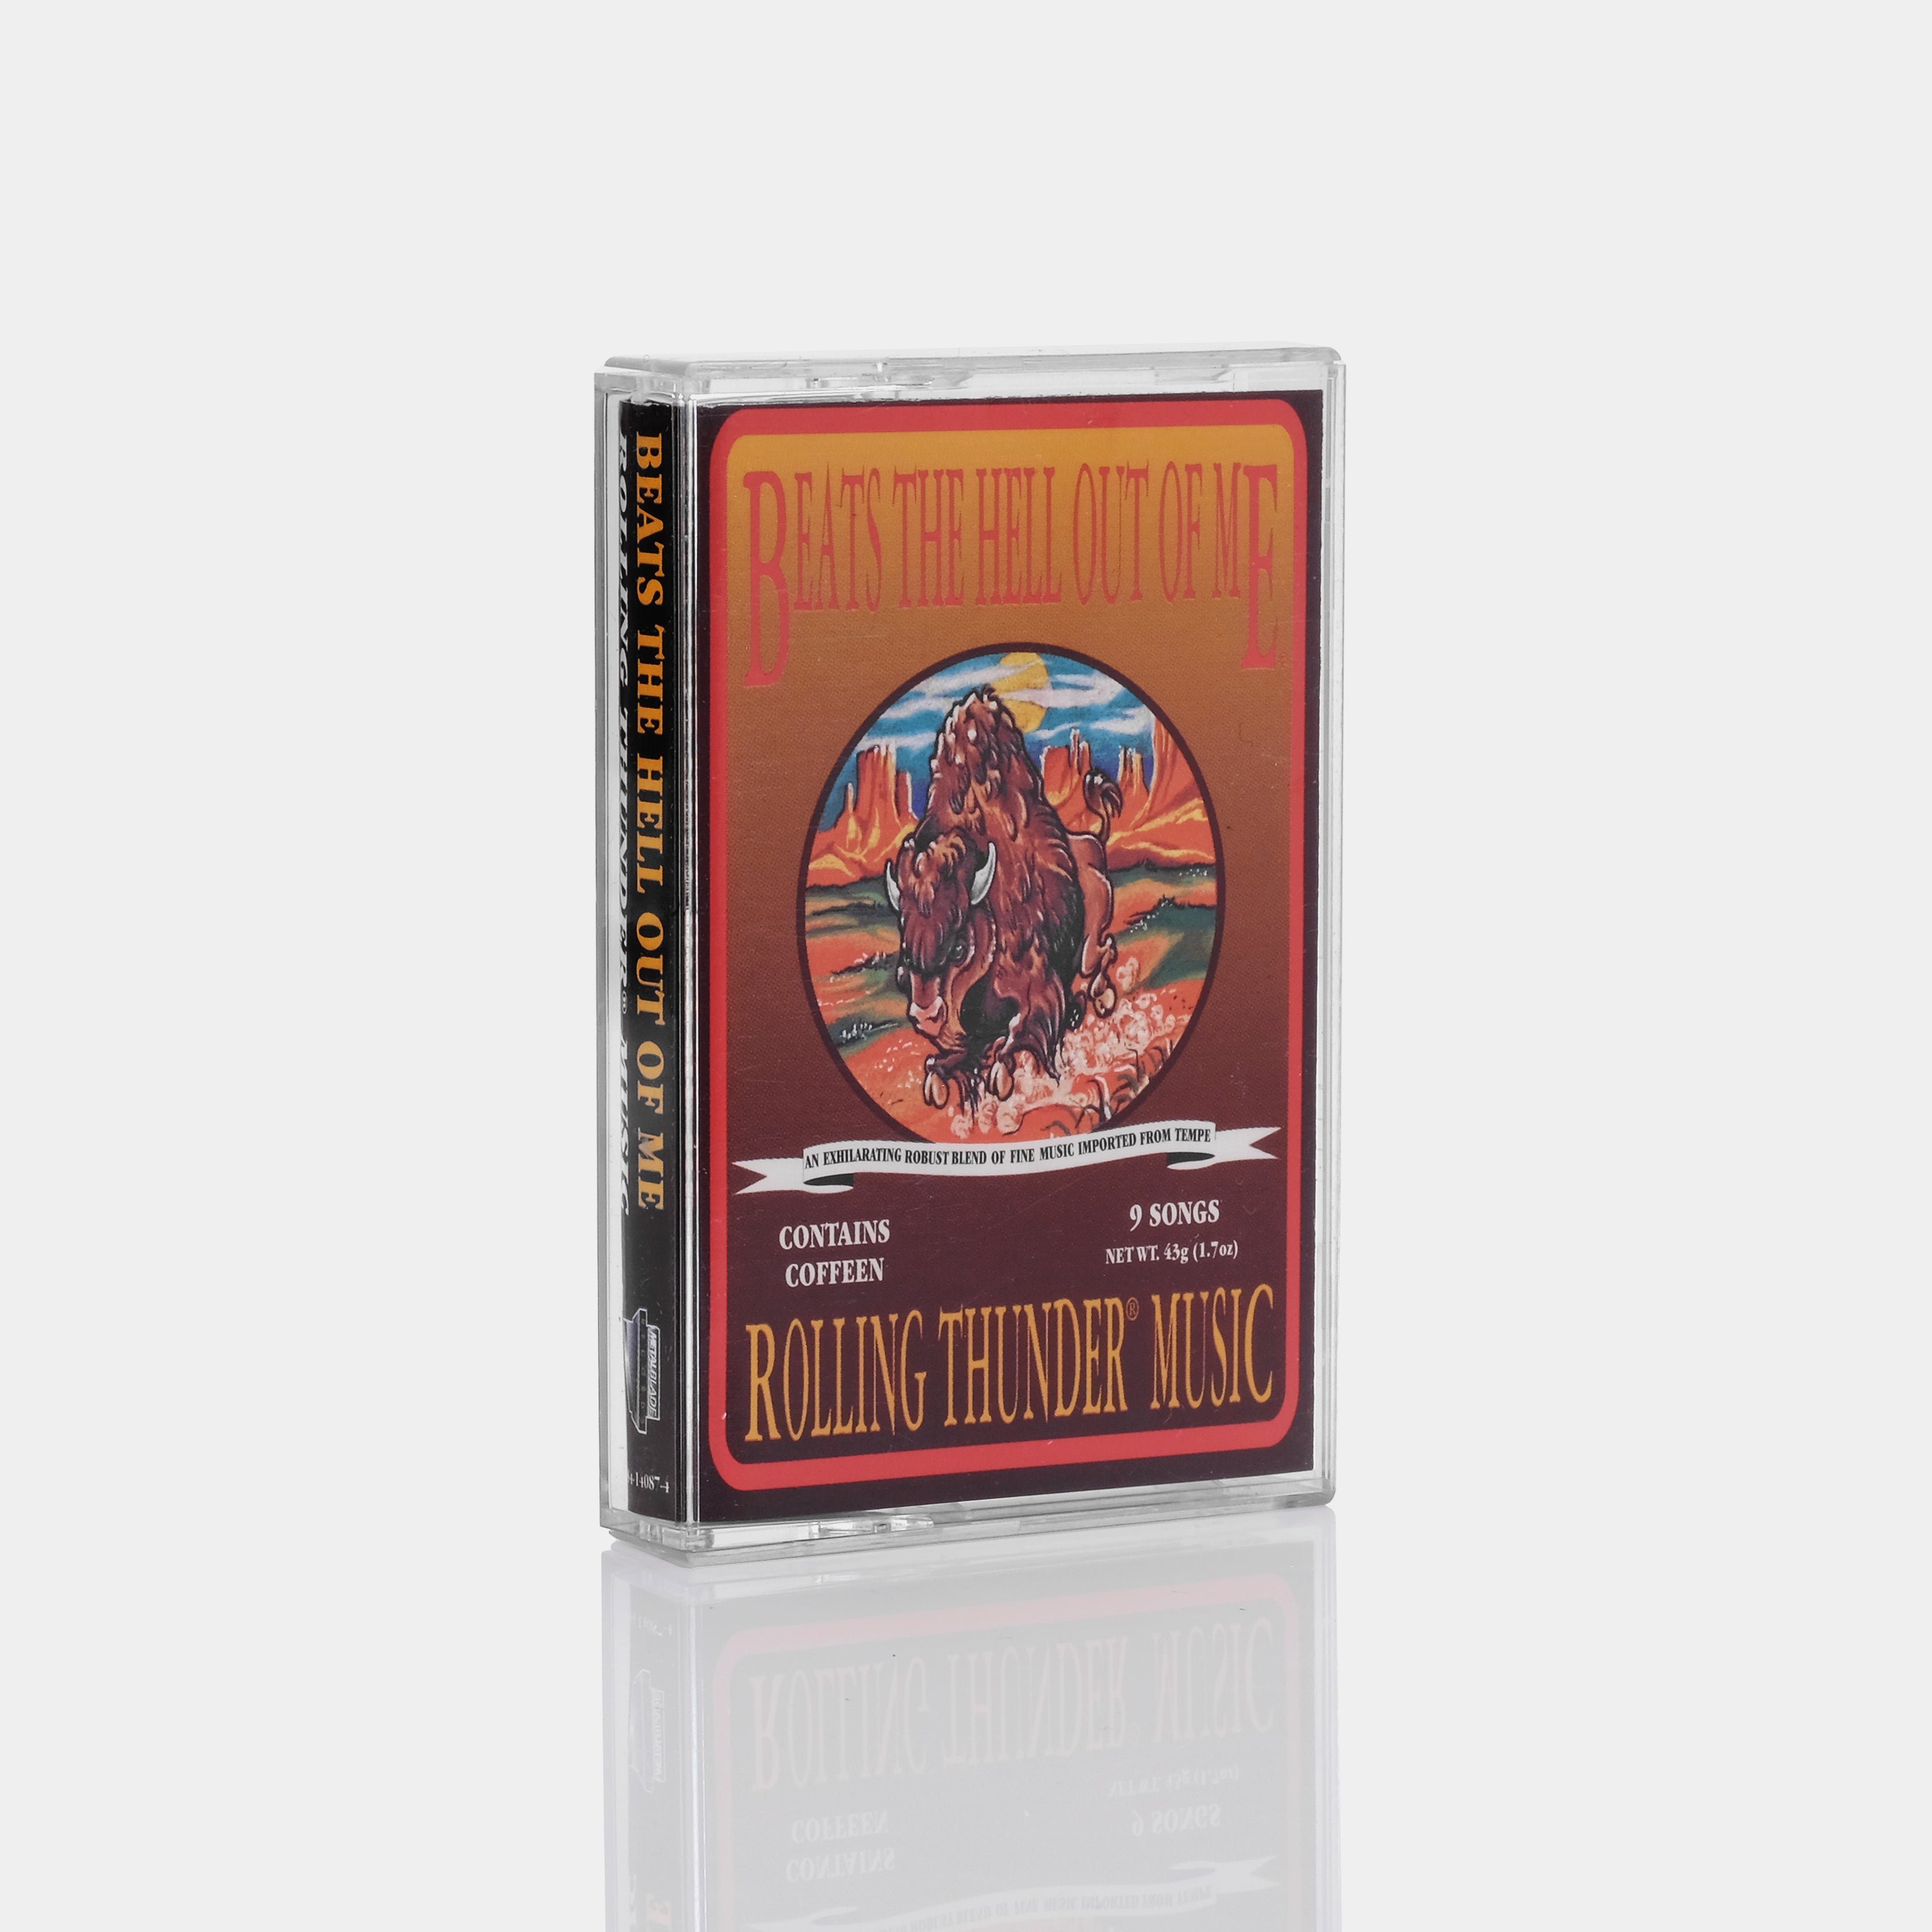 Beats The Hell Out Of Me - Rolling Thunder Music Cassette Tape